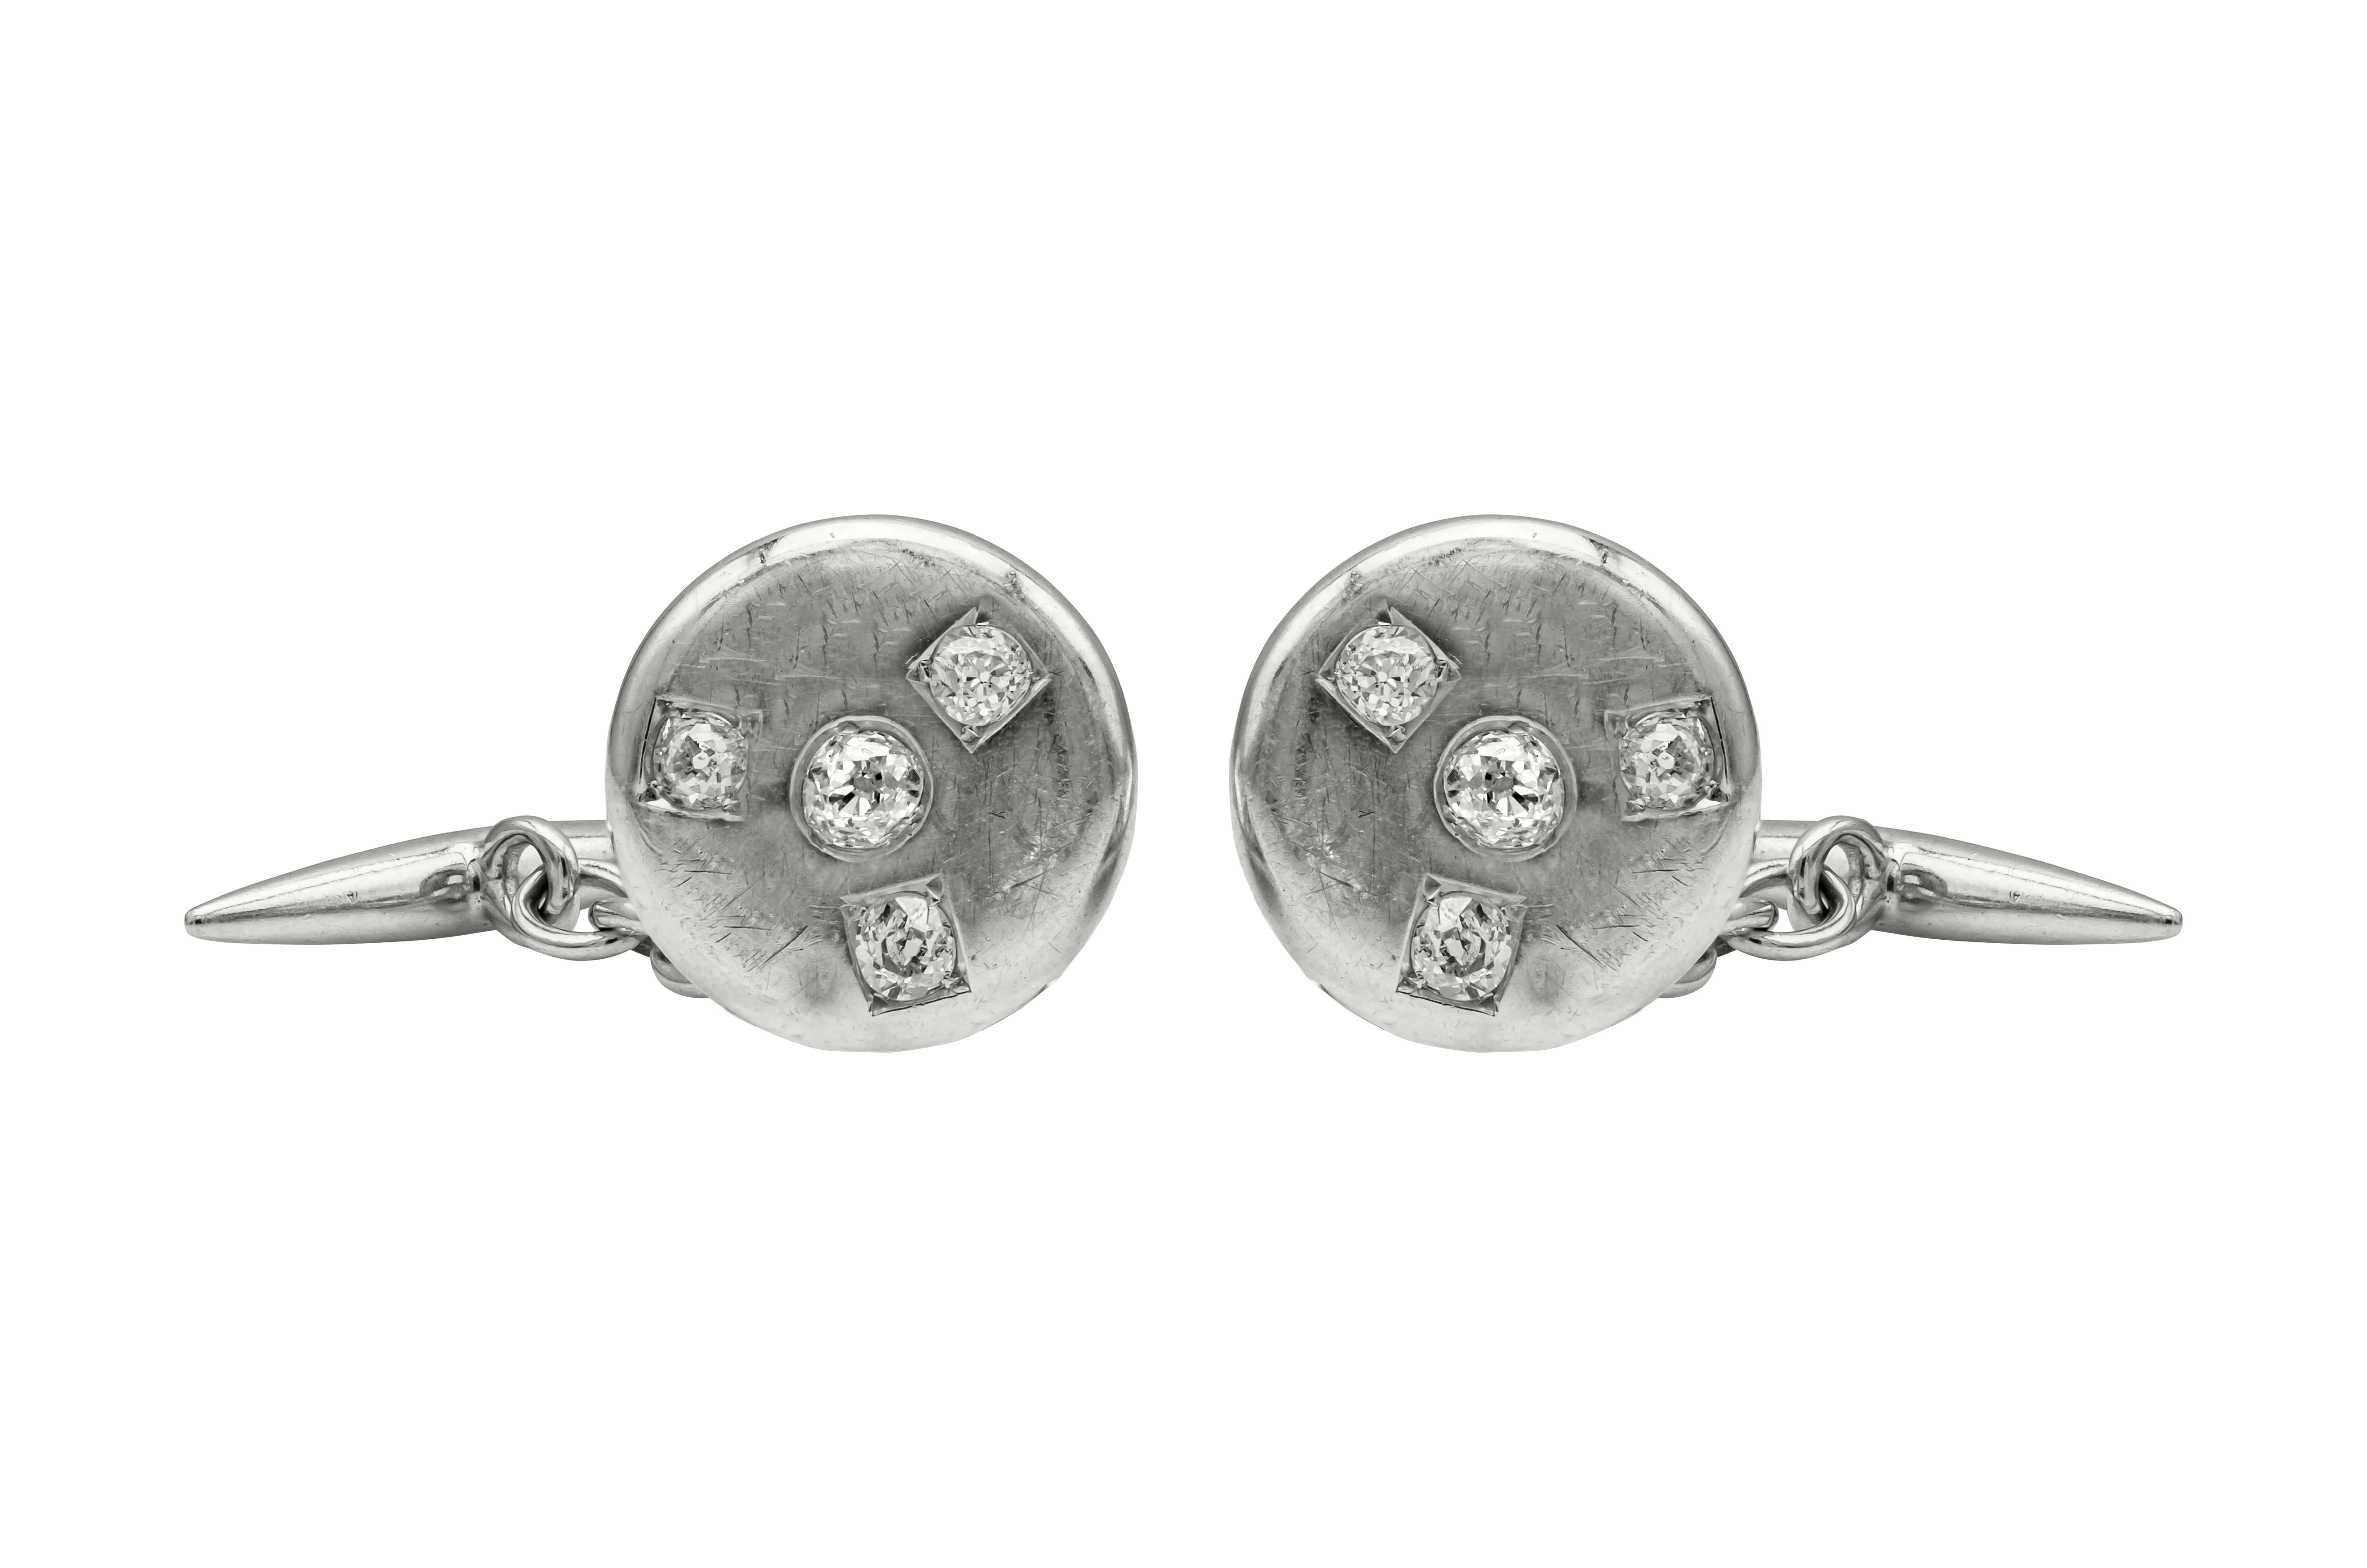 Showcasing a vintage piece of cufflinks accented with 8 antique old European Cut diamond weighing 1 carats total, set in a chain link design between the disc and bar. Finely made in 18k white gold.